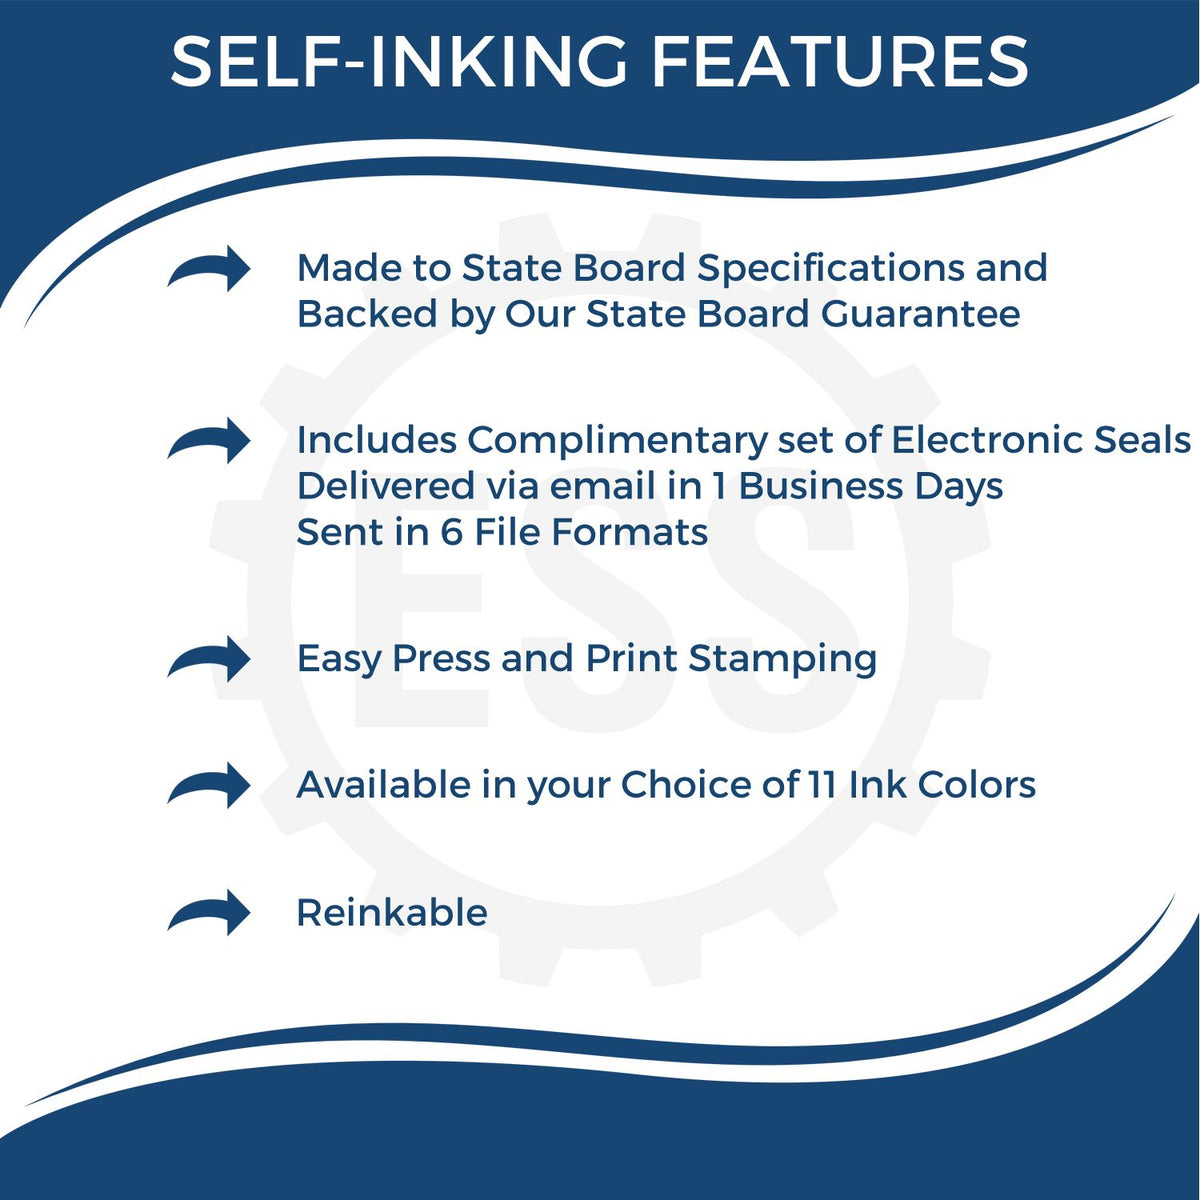 A picture of an infographic highlighting the selling points for the Self-Inking Rectangular Missouri Notary Stamp